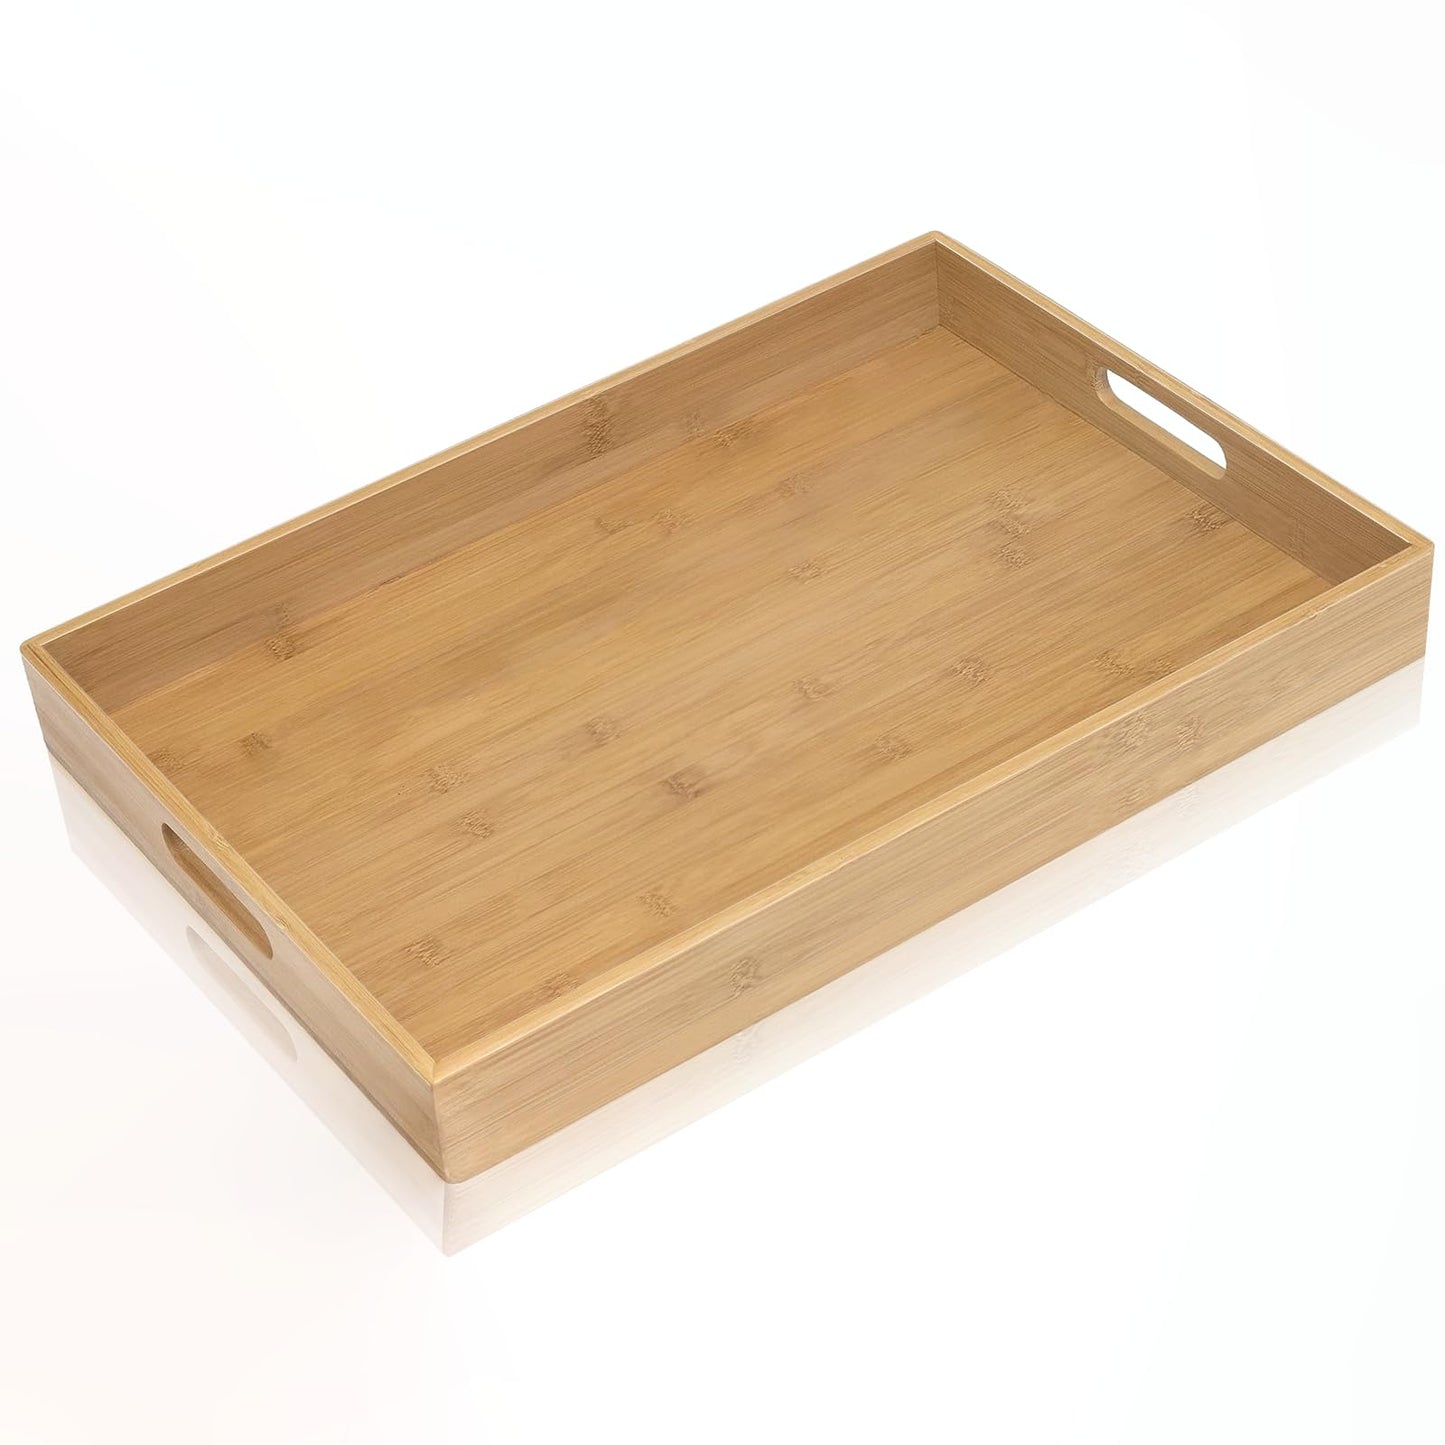 Krimax Serving Tray with Handles, Bamboo Breakfast Tray Wooden Trays Decorative Serving Platter for Eating, Working, Storing, Used in Bedroom,